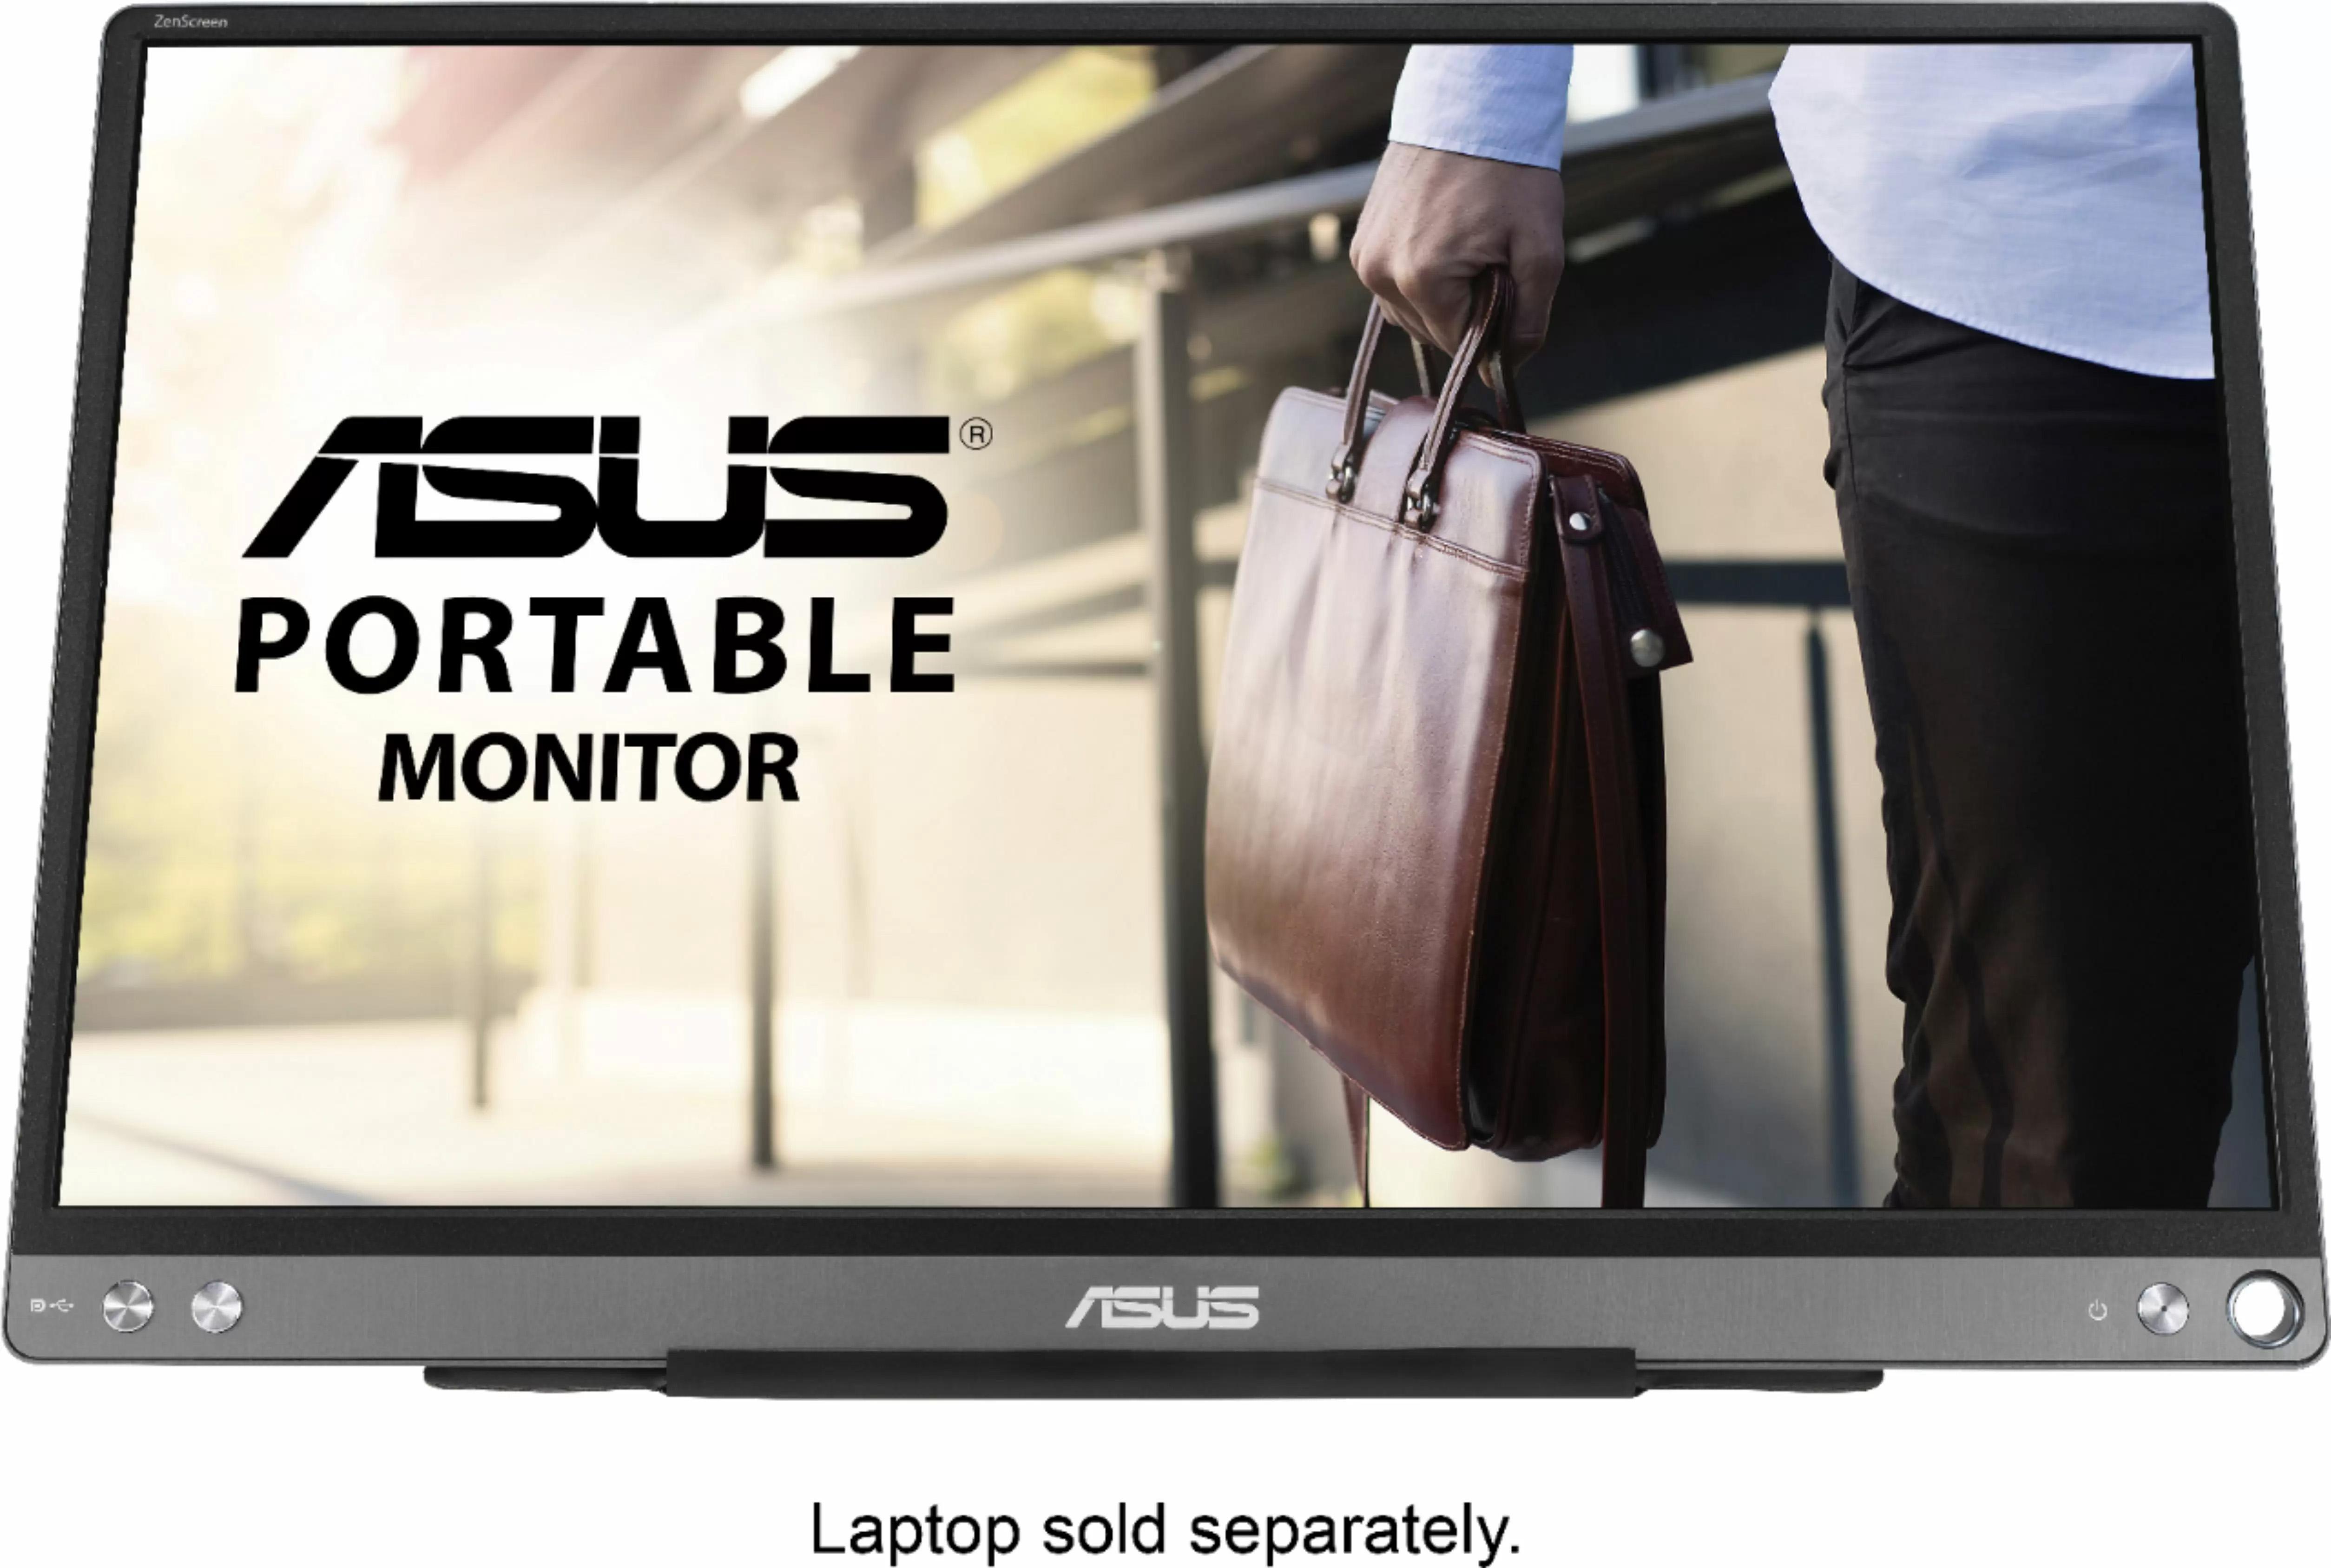 Asus ZenScreen 15.6in 1080p Portable Monitor for $99.99 Shipped